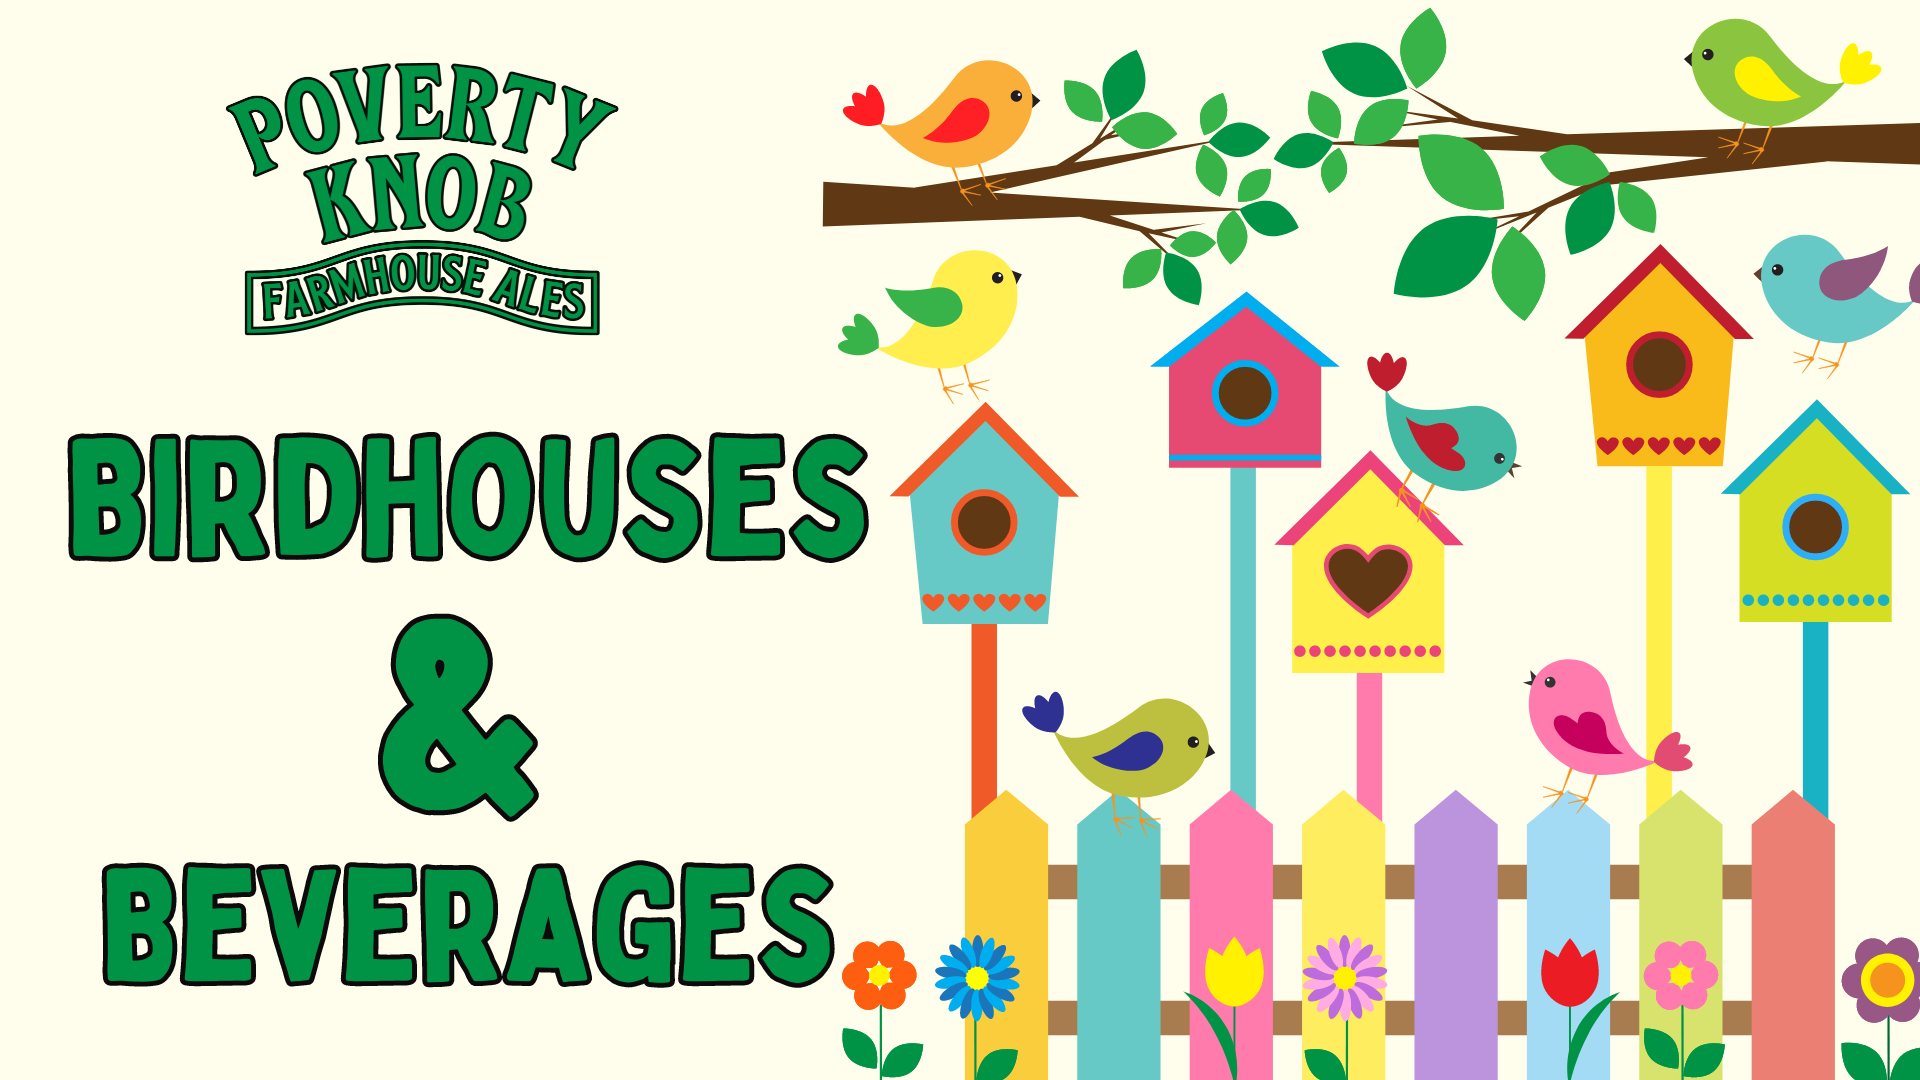 Birdhouses & Beverages at Poverty Knob (SOLD OUT)